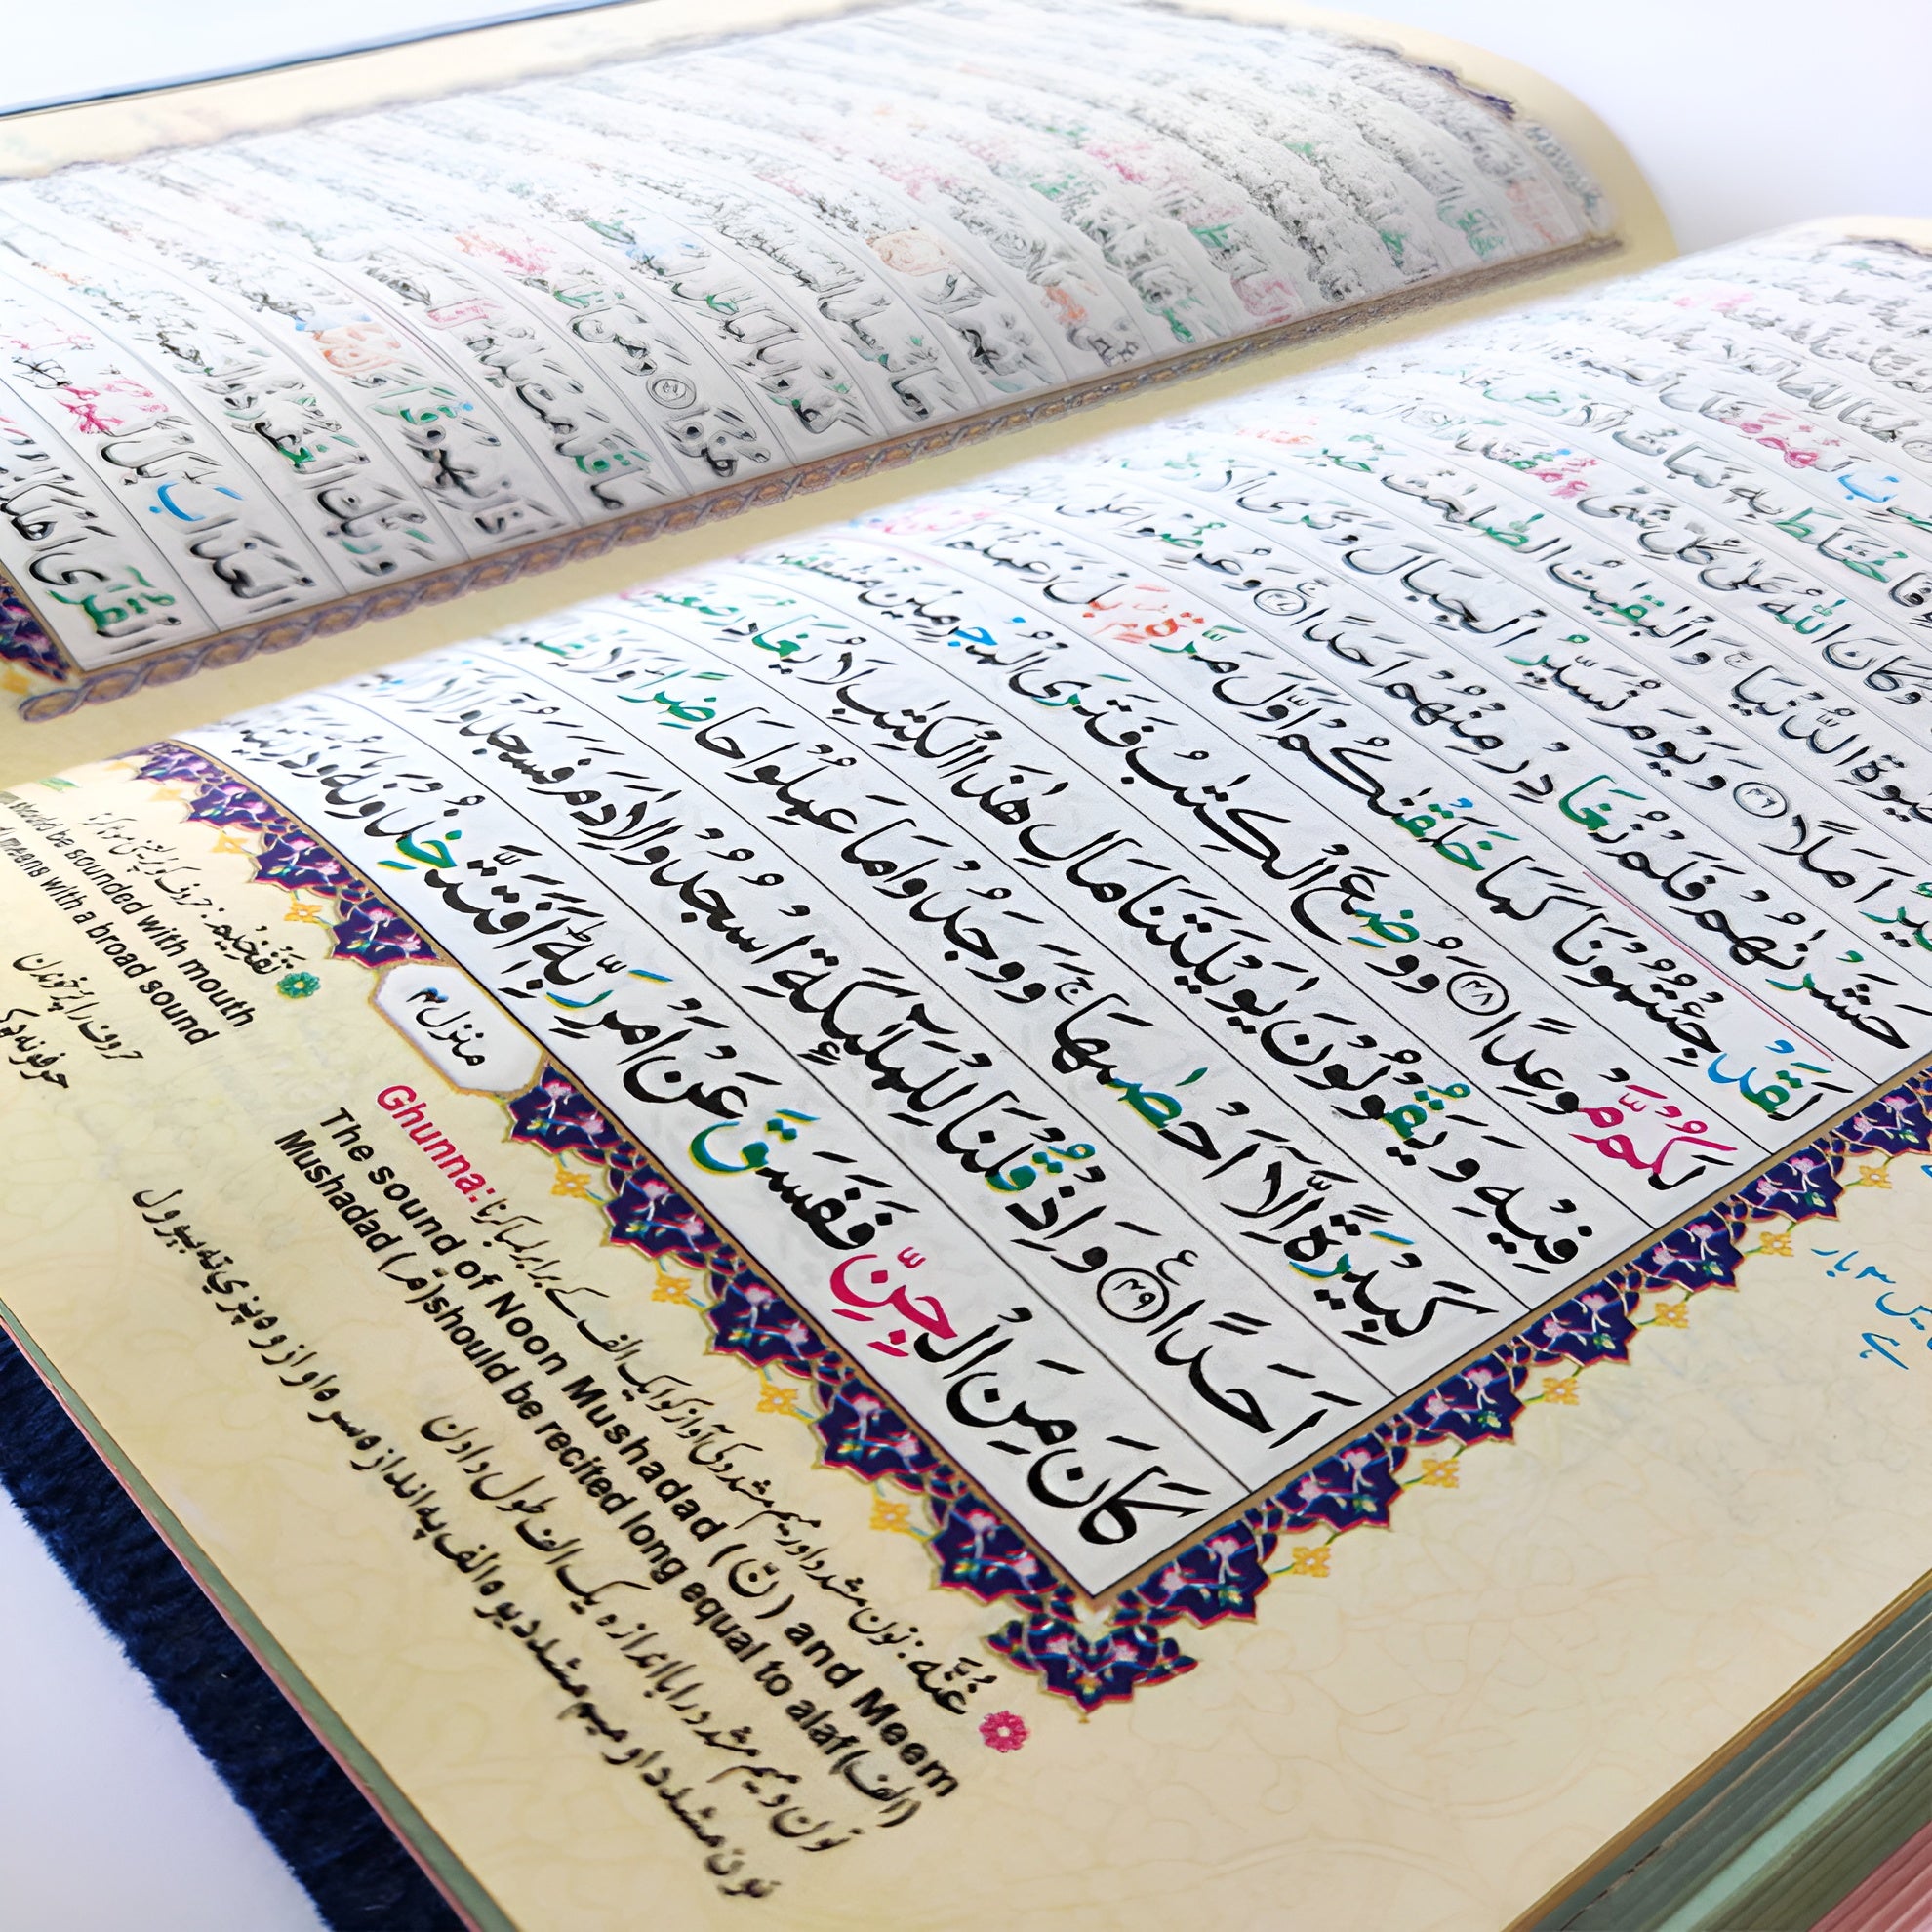 PINK PARADISE VELVET QURAN SET (WITH COVER)